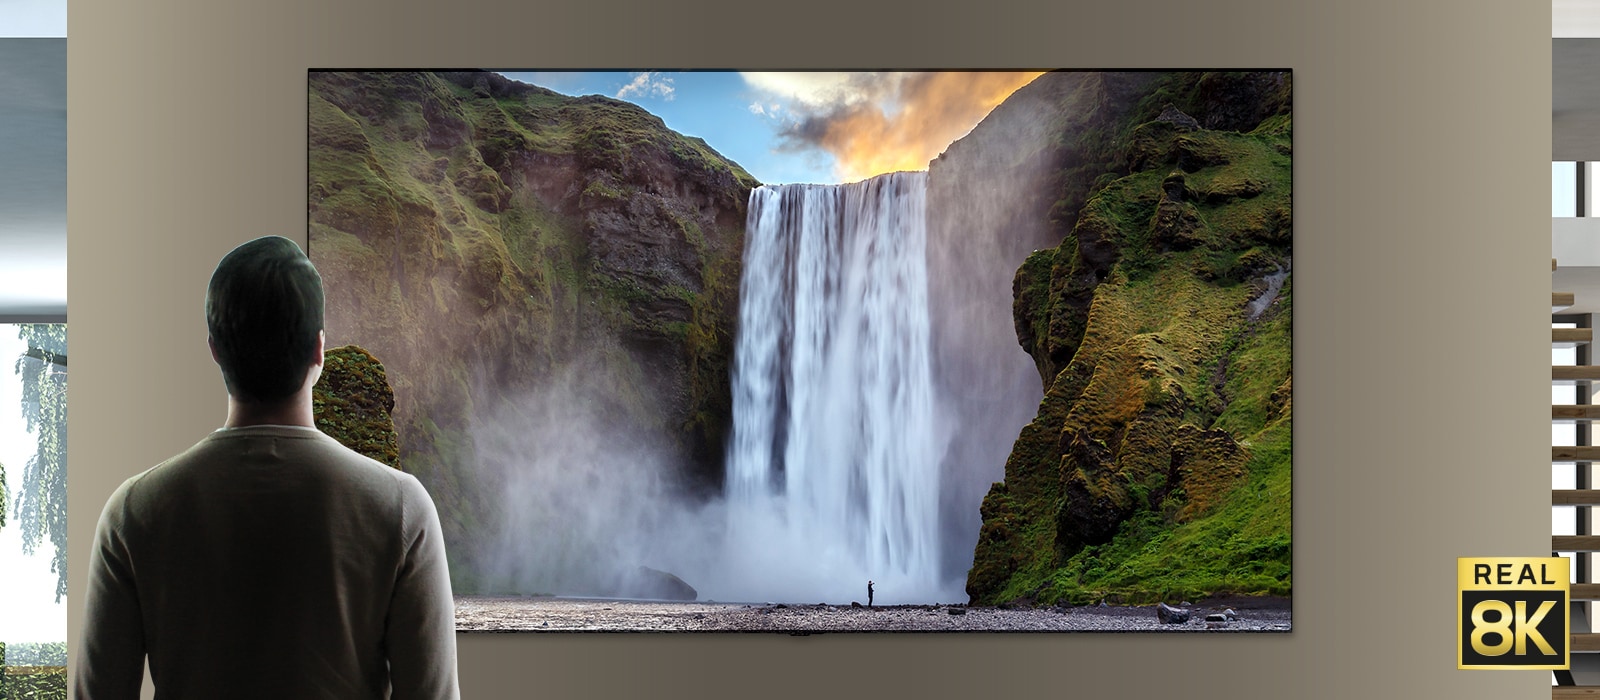 A man stood in front of an imposing view of a large waterfall crashing down cliffs. The scene zooms out to show the waterfall as an image on a wall mounted TV.